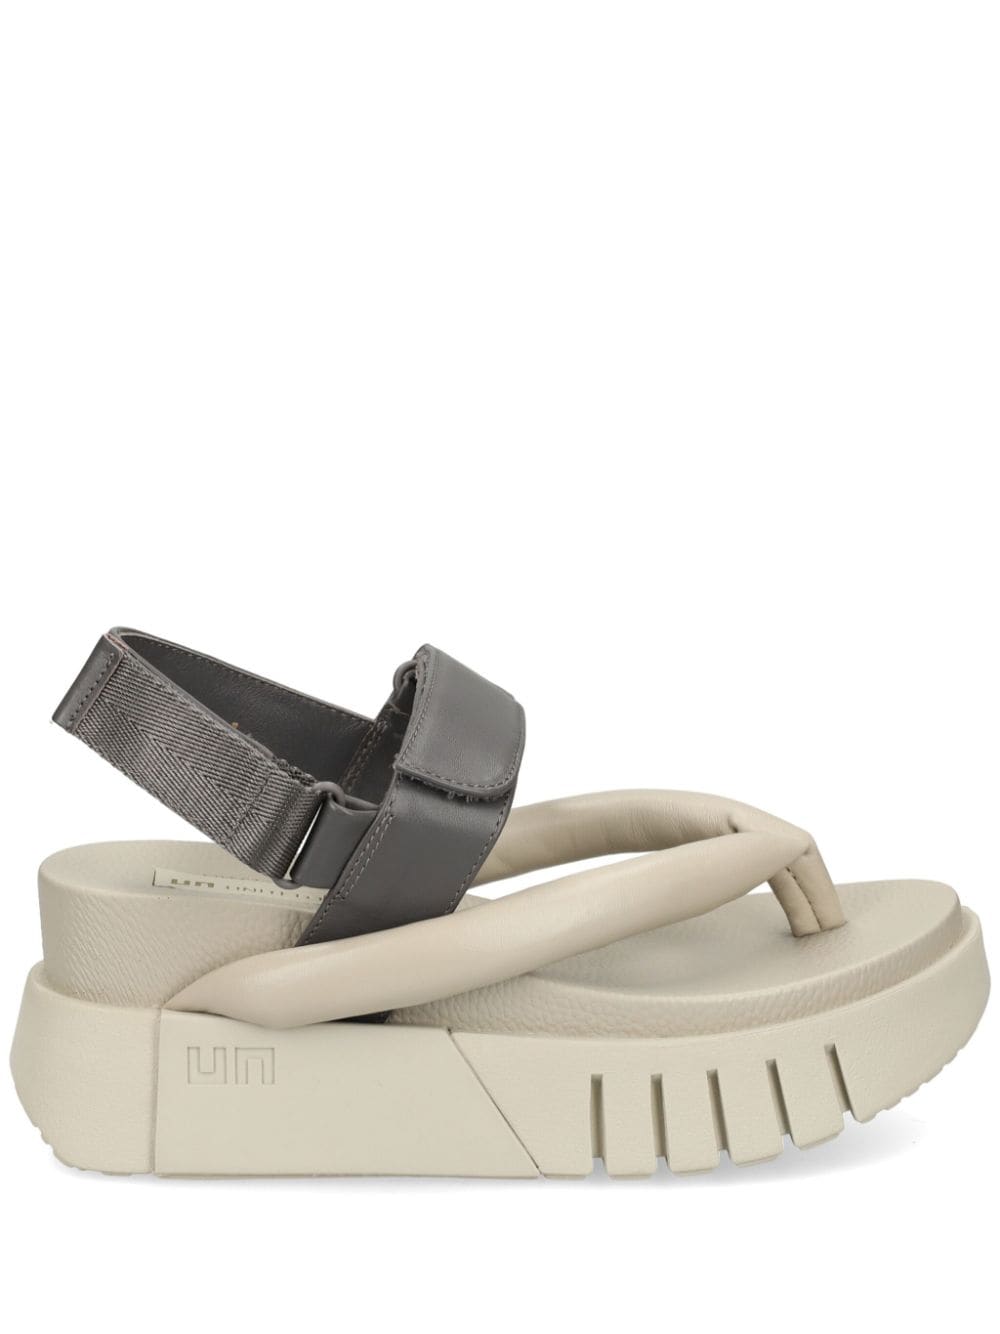 United Nude Delta Thong 厚底凉鞋 In Neutrals